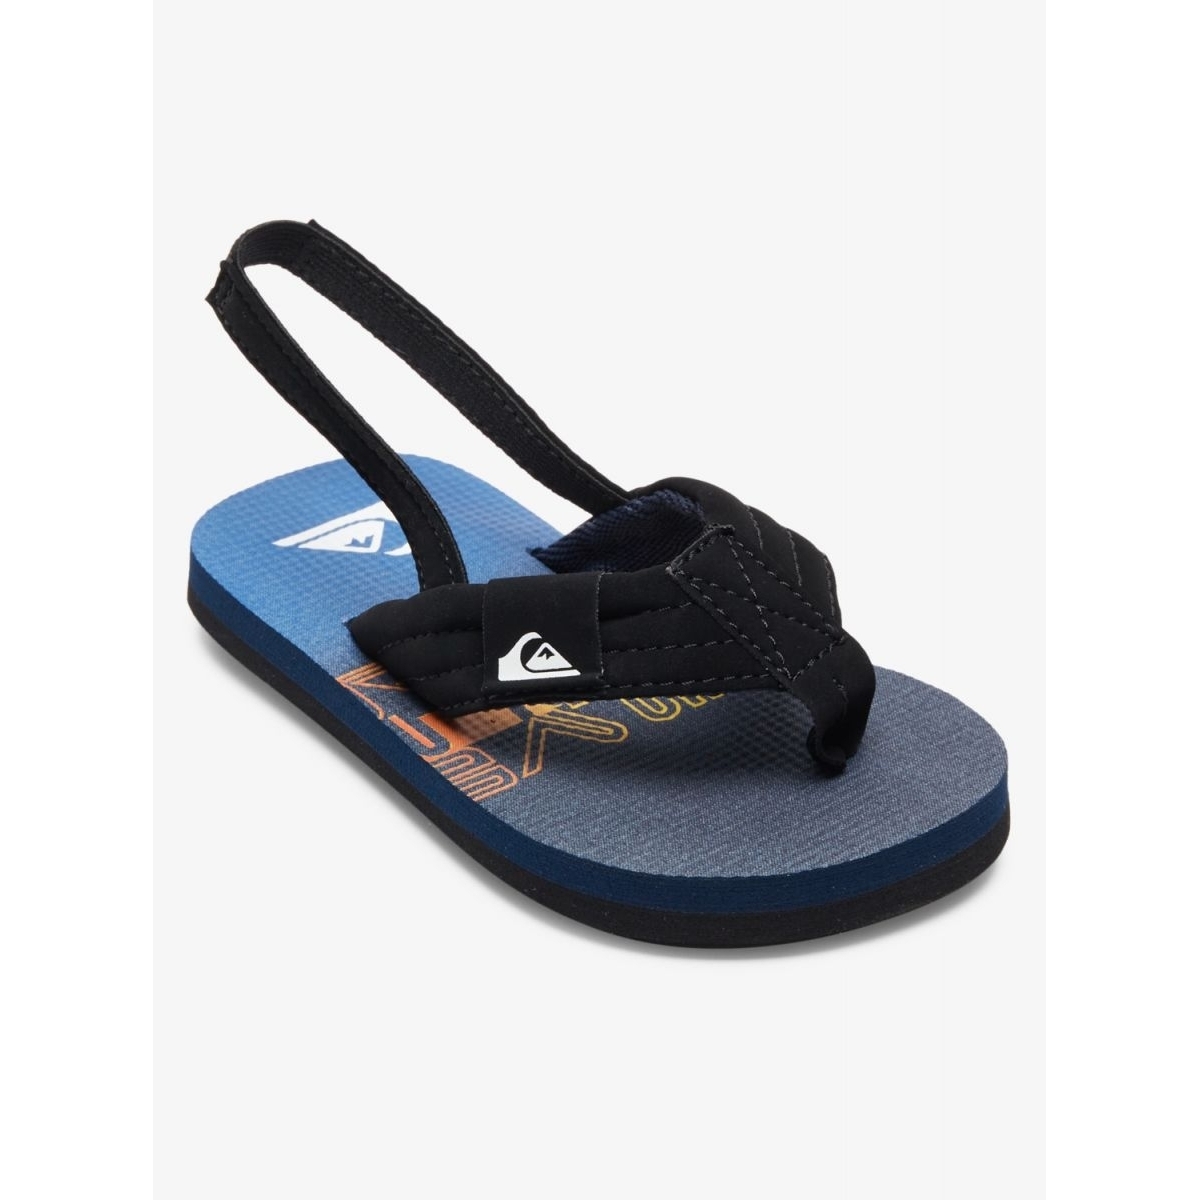 Quiksilver Toddlers' Molokai Layback Flip Flop Sandals Blue 3 - AQTL100066-BYJ3 BLUE 3 - BLUE 3, 7 Toddler